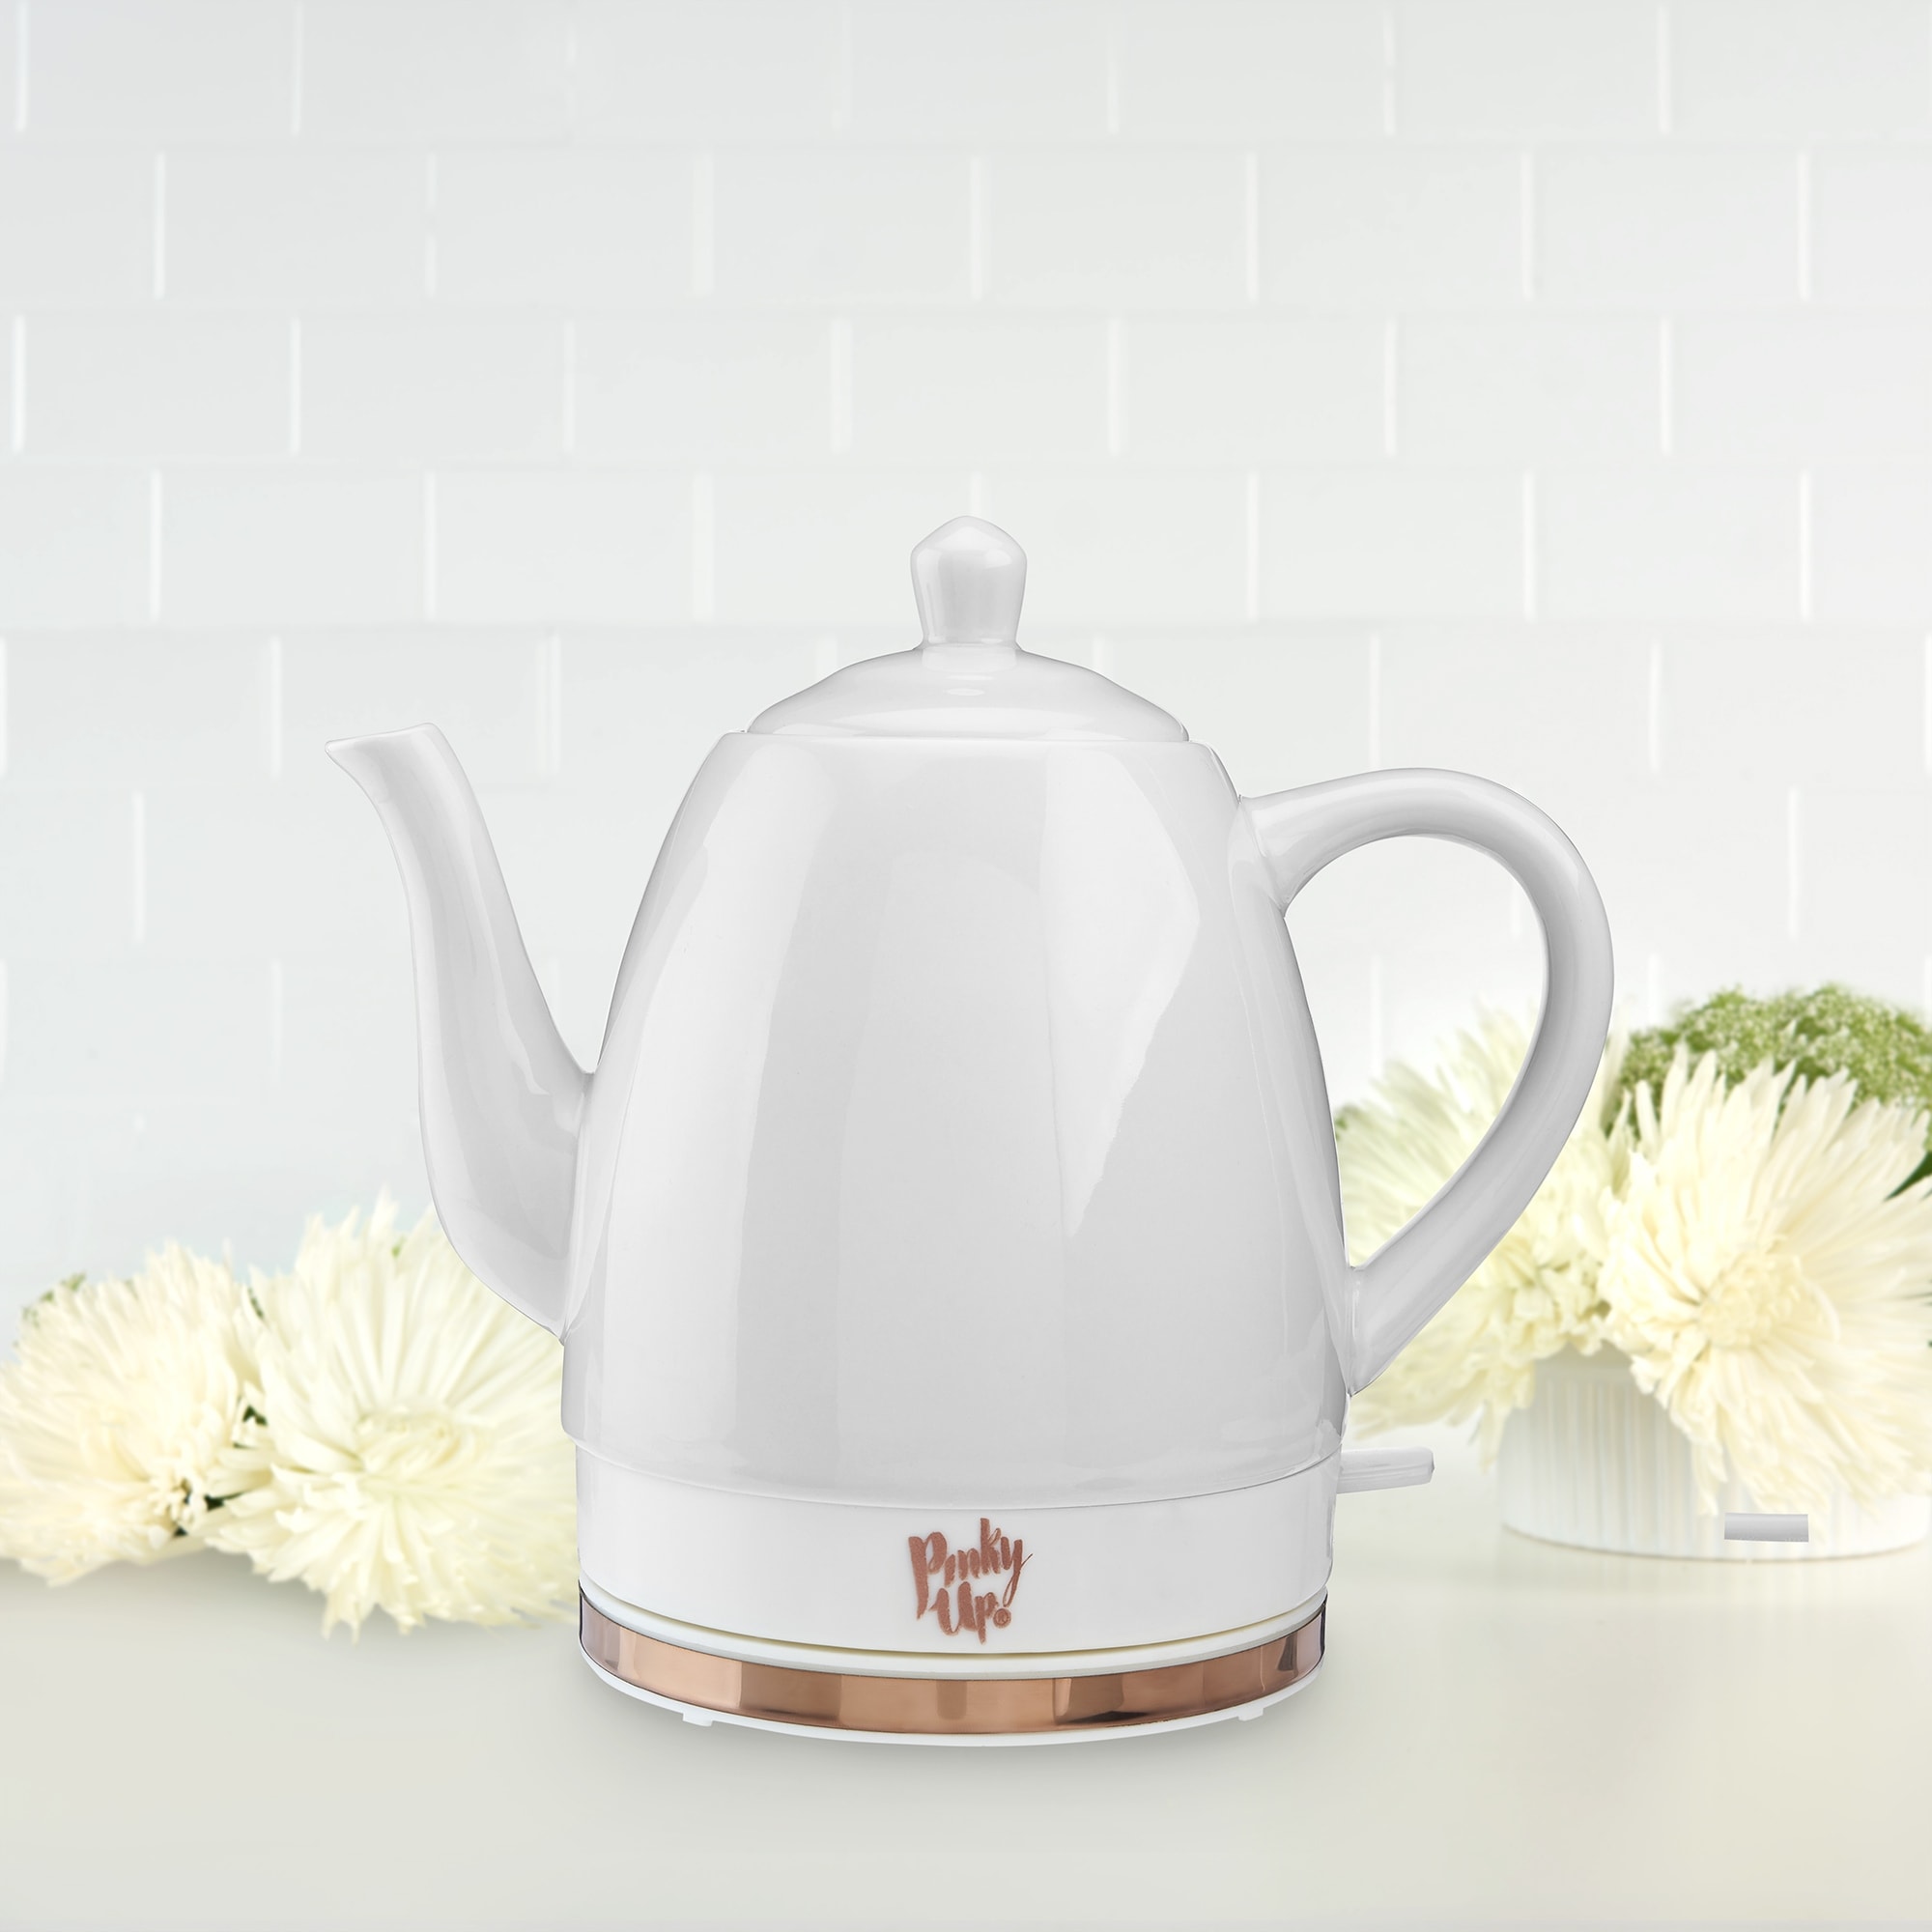 https://ak1.ostkcdn.com/images/products/is/images/direct/ac01bac29a60105d2be1aca69ace9c0ab21cd8b2/Noelle-Grey-Ceramic-Electric-Tea-Kettle-by-Pinky-Up.jpg